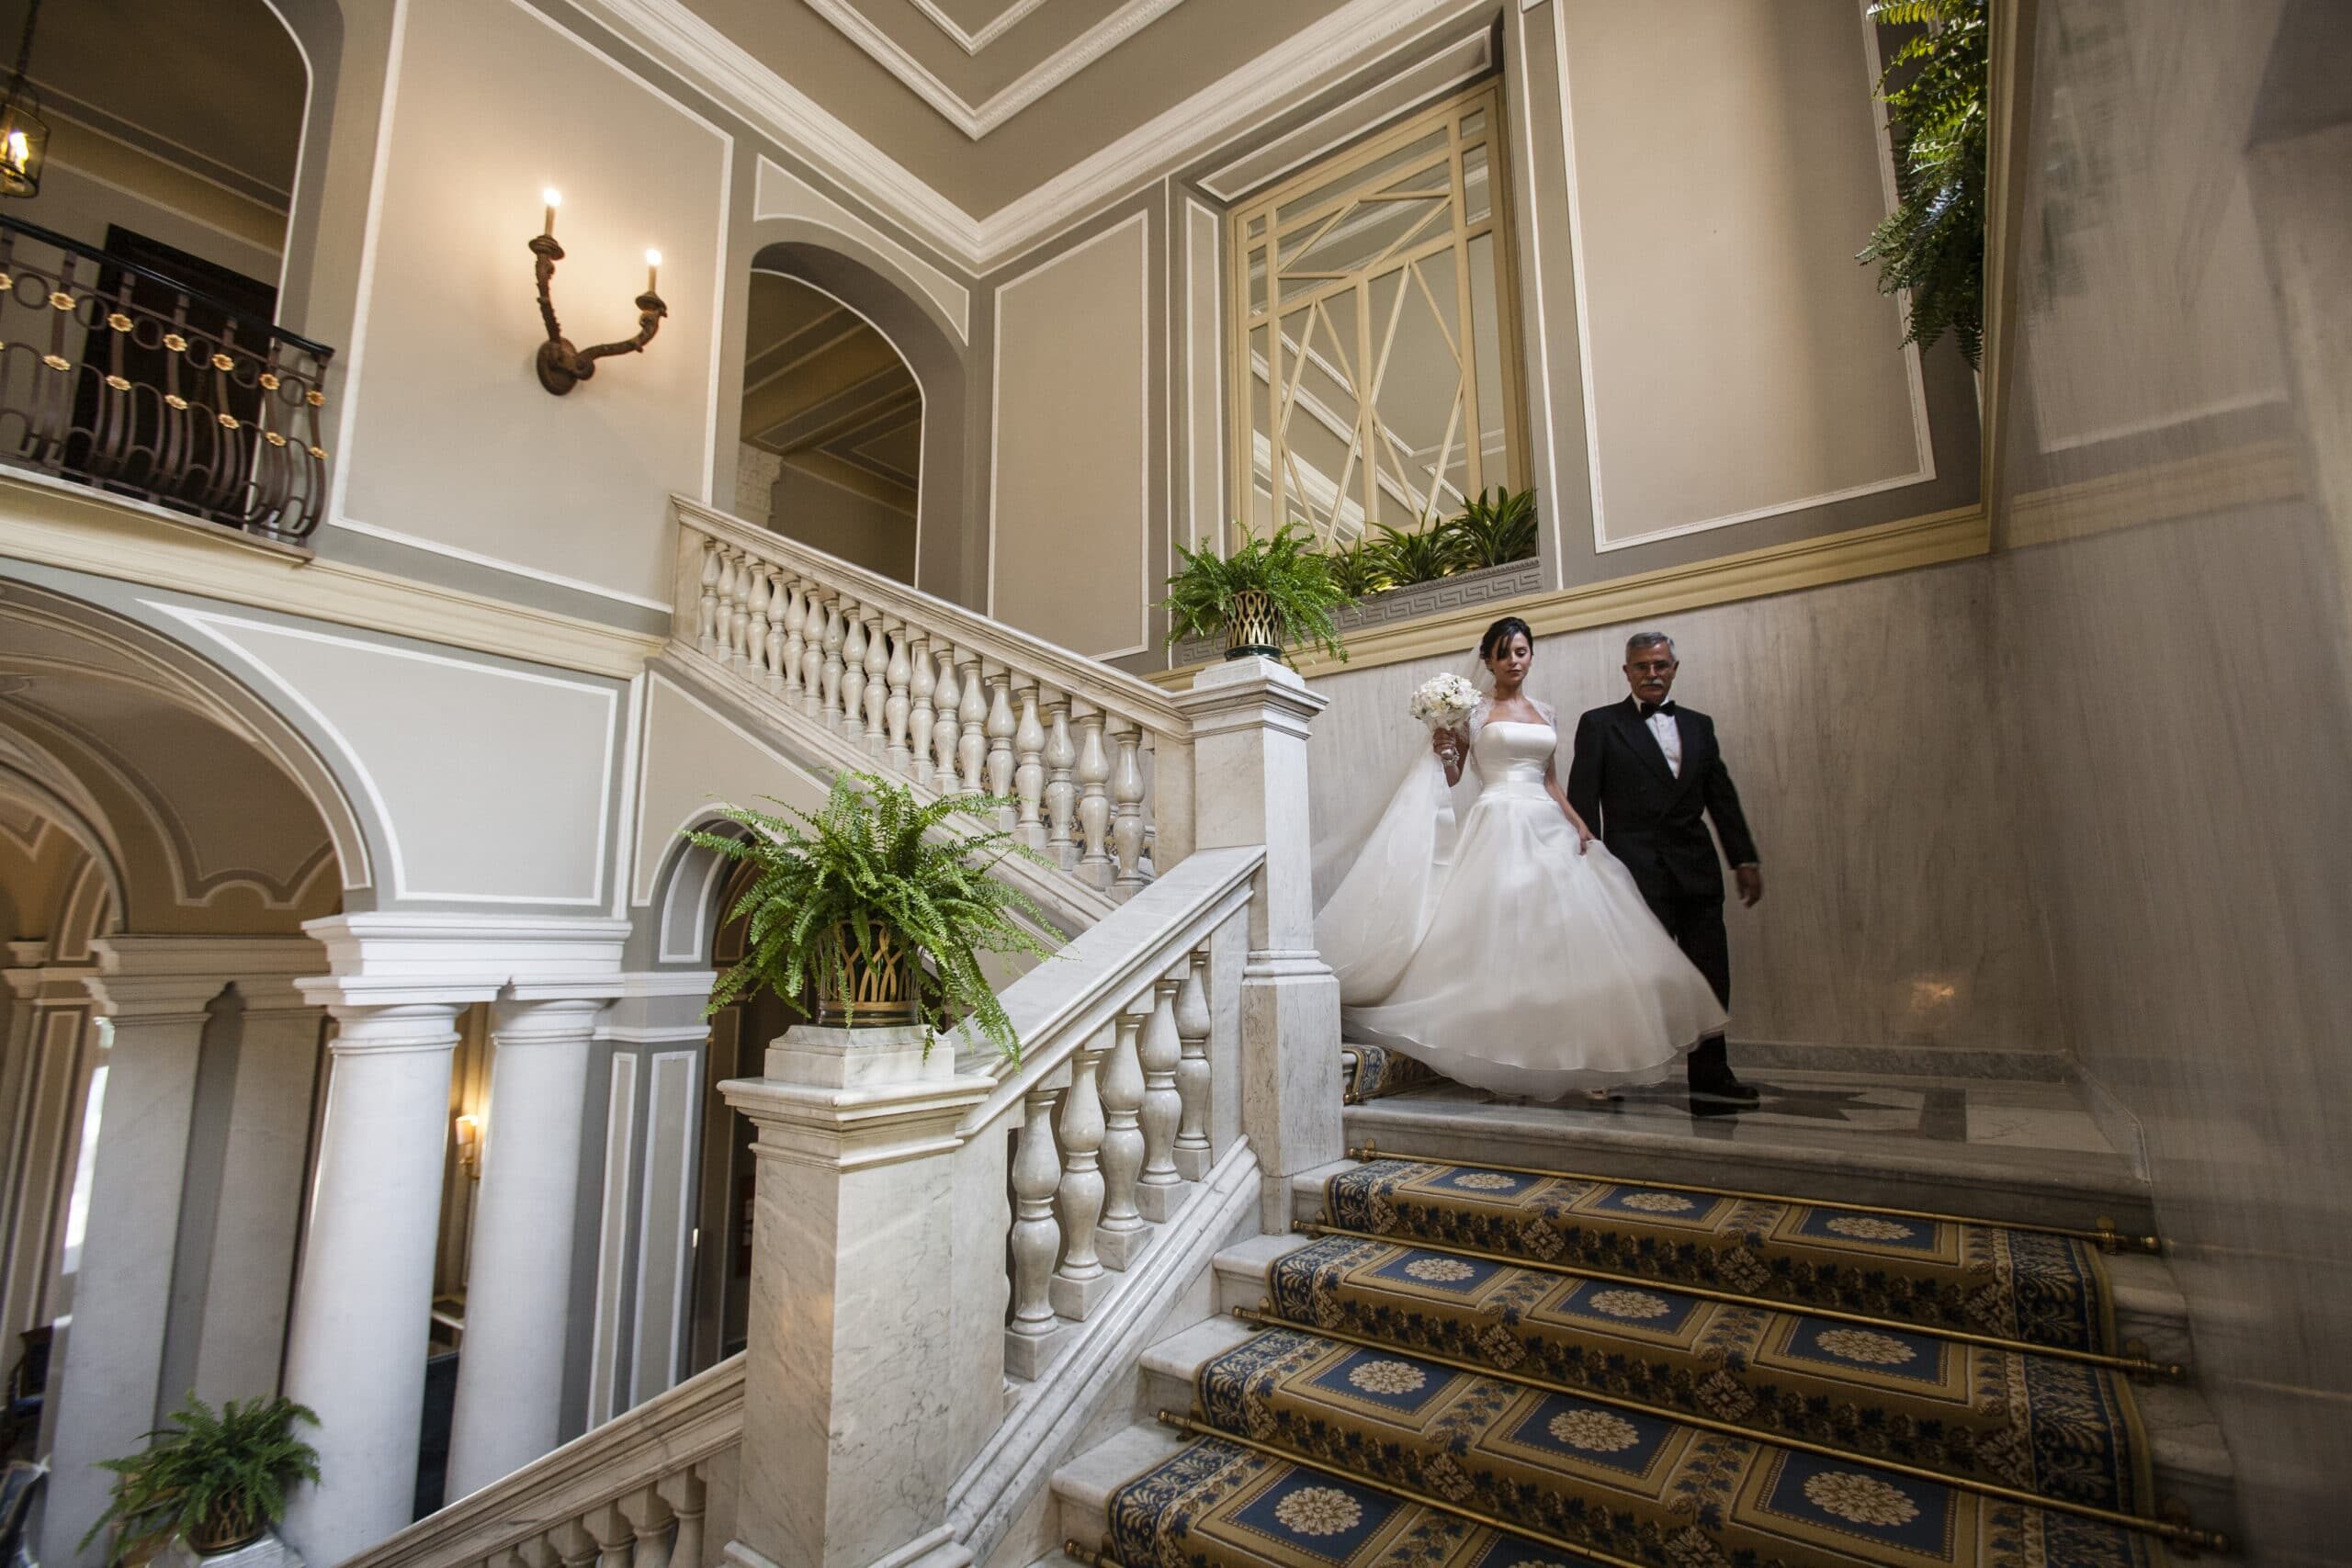 The newlyweds on the stairs at Villa d'Este in Lake Como